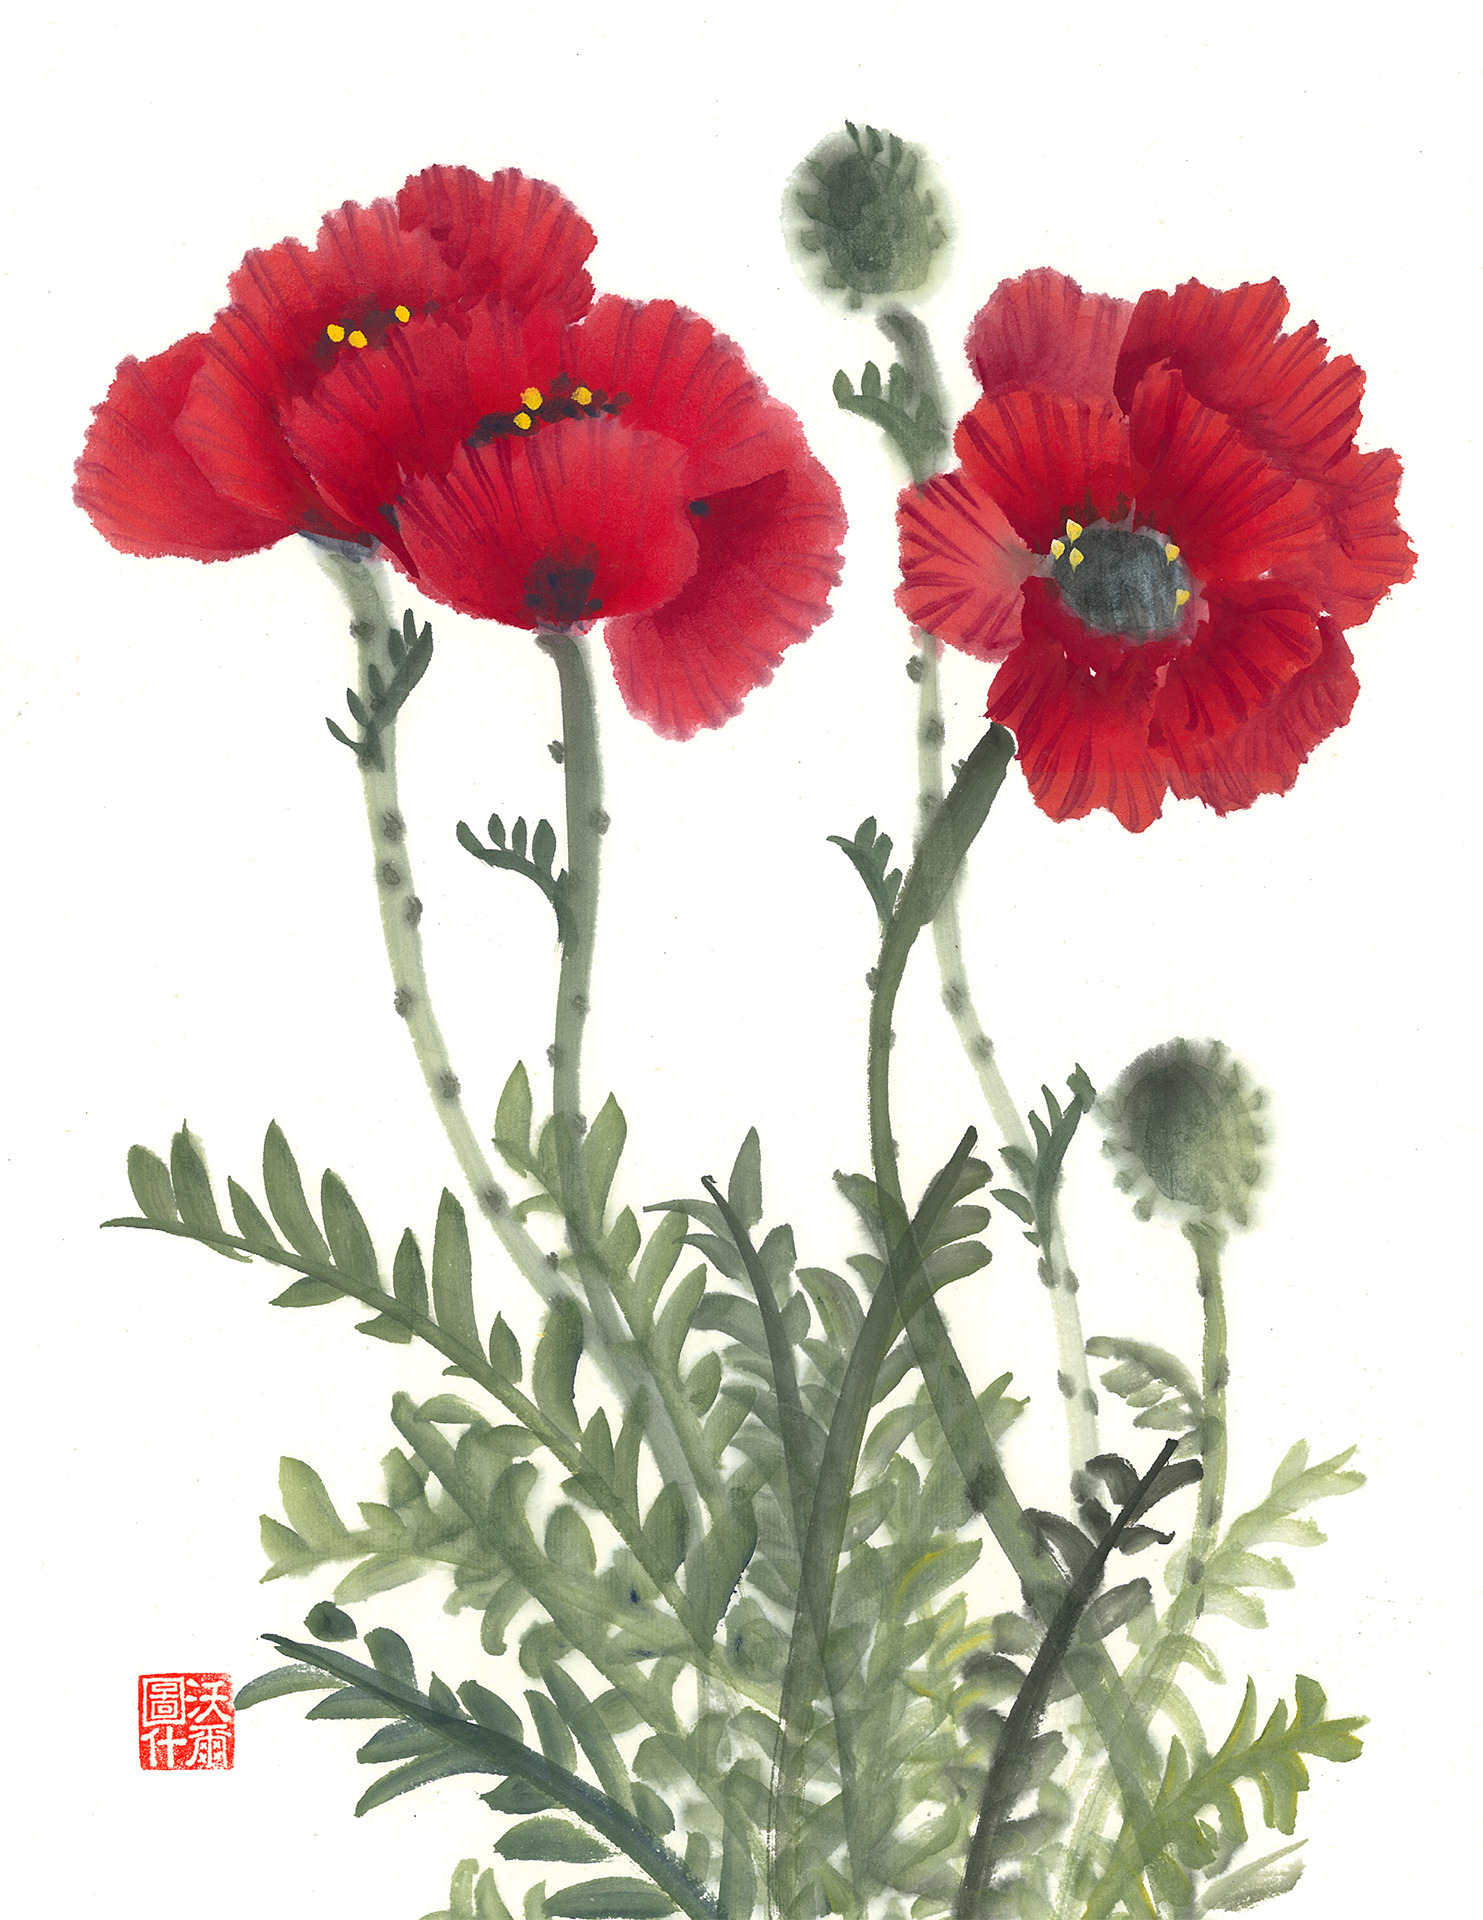 8.5x11 available poppies2 mcpy5m wk9ke8